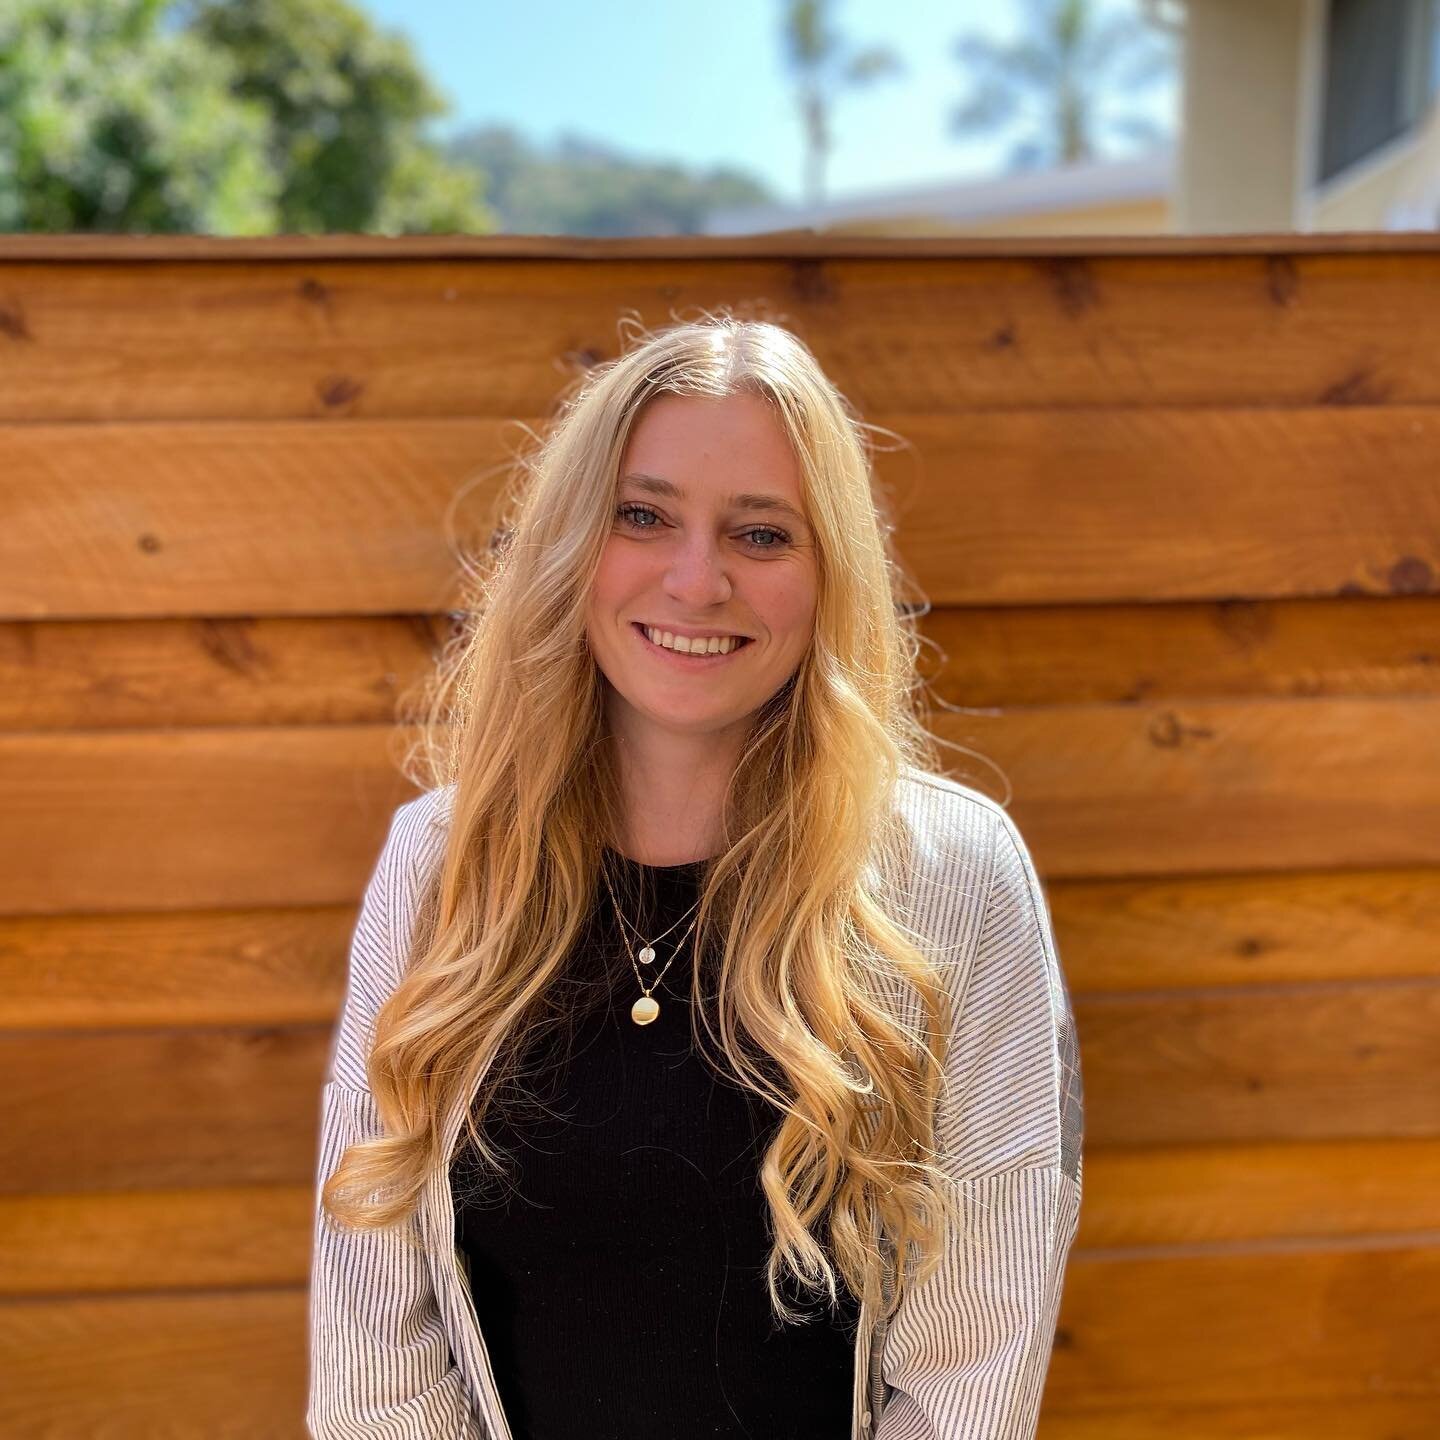 For this week's Staff Appreciation, we would like to recognize our amazing Education Coordinator Madison Smoak. She exemplifies what it means to be a changemaker and a community-shaker here at the Turner Foundation. As an Education Coordinator, Madis